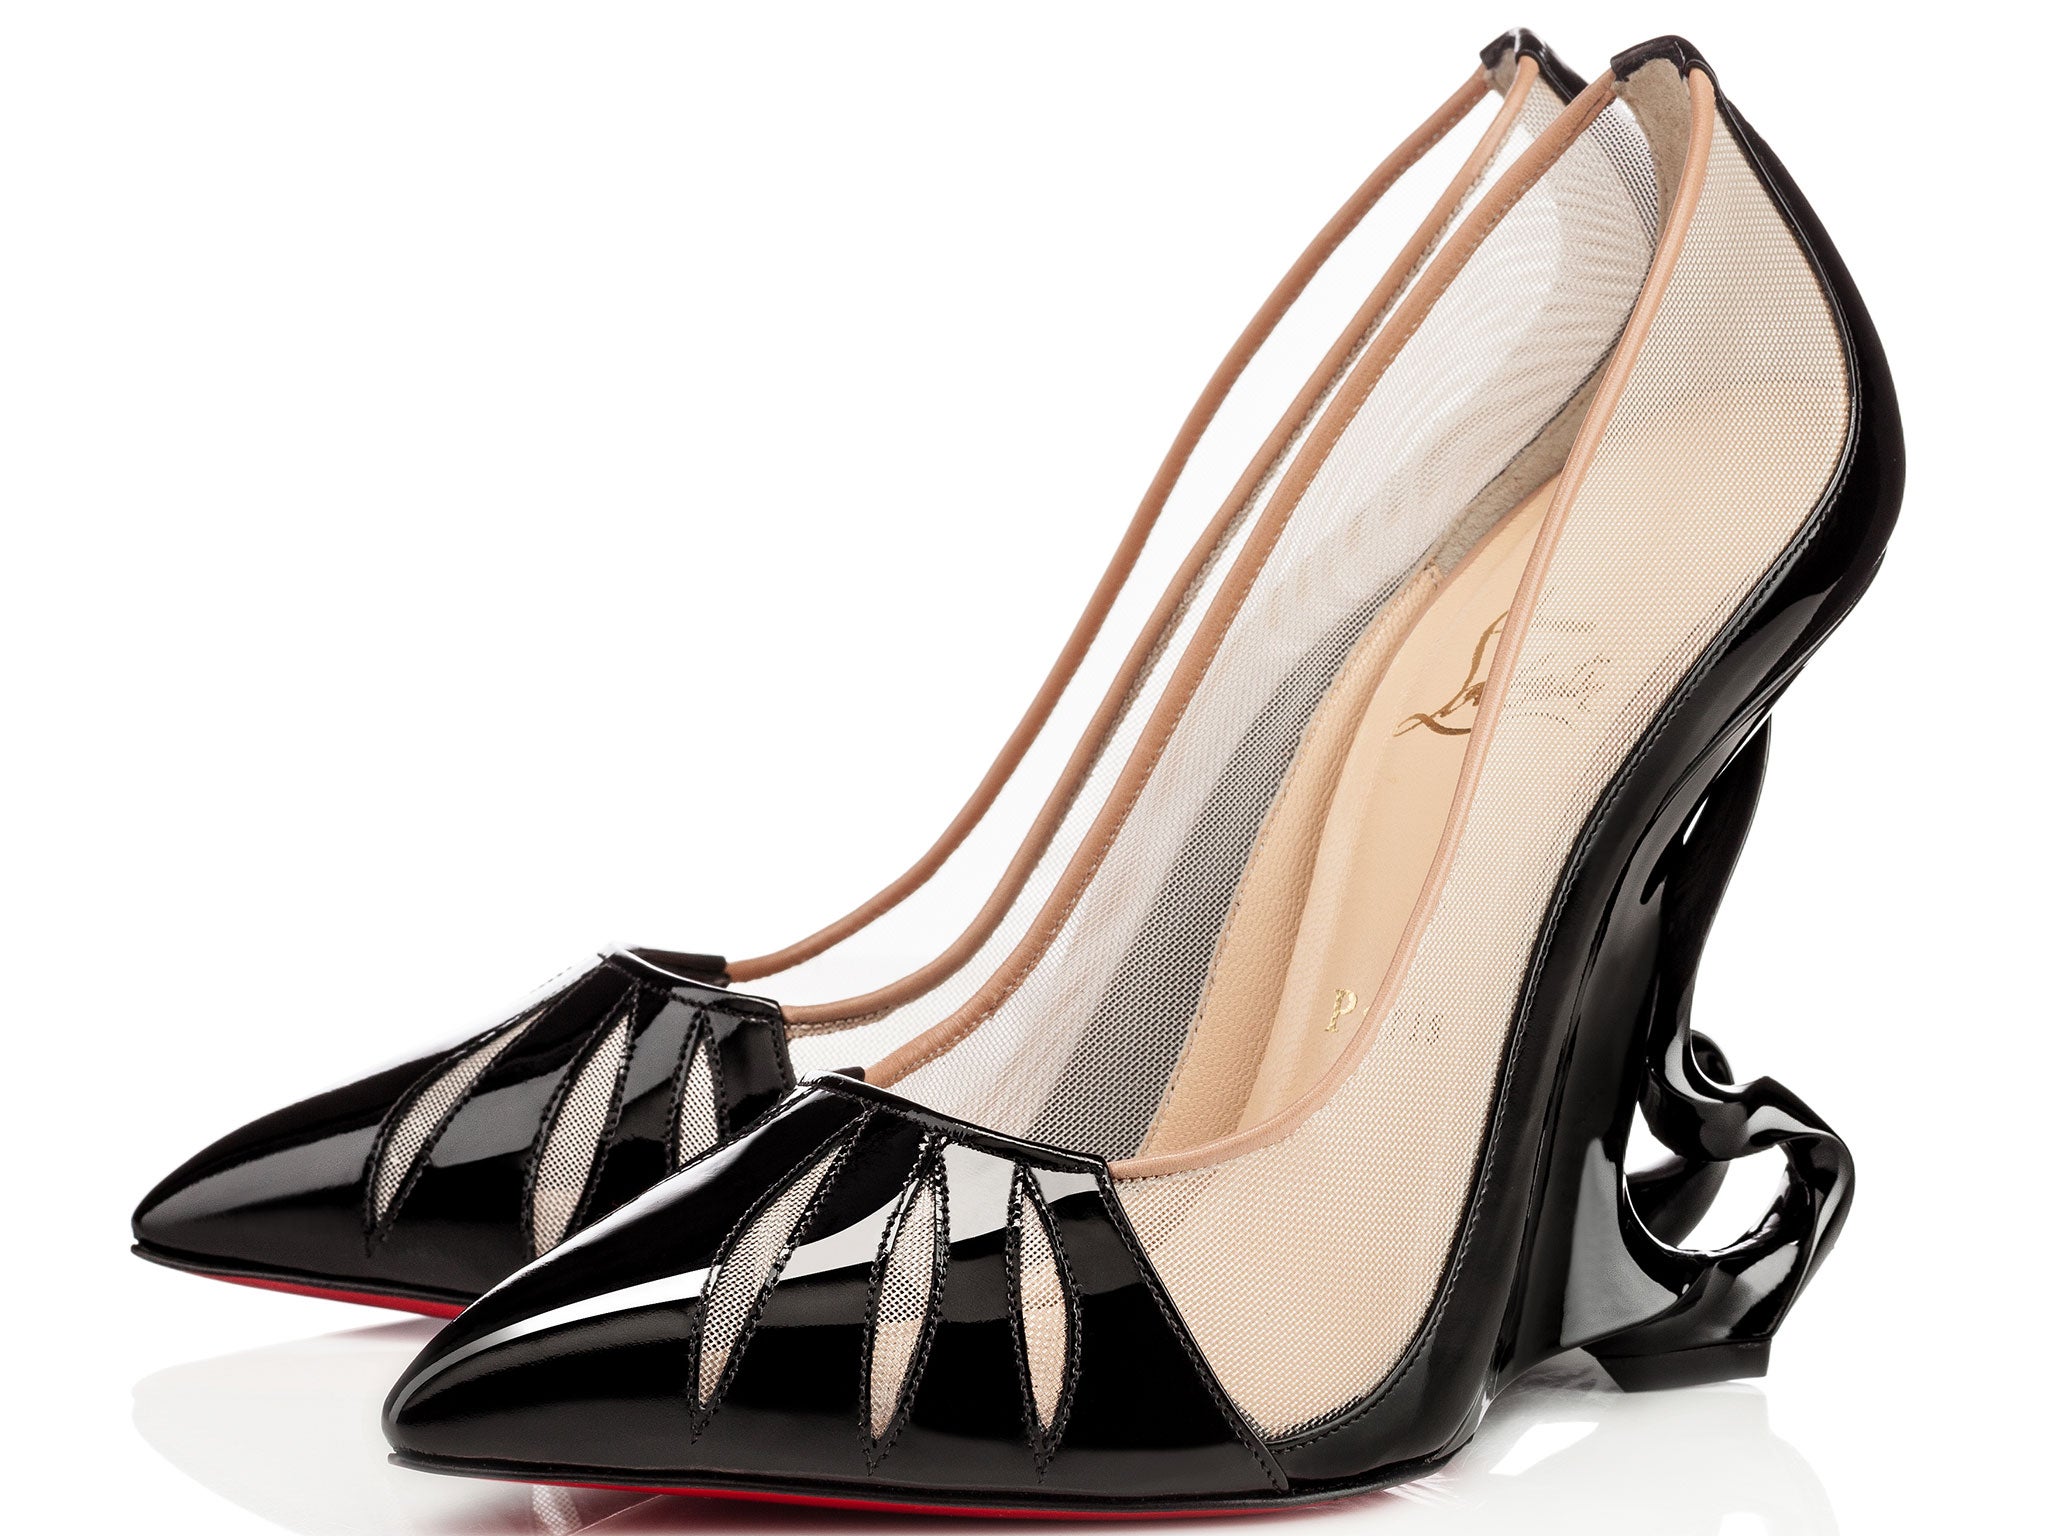 The pair of the structured court-like shoes